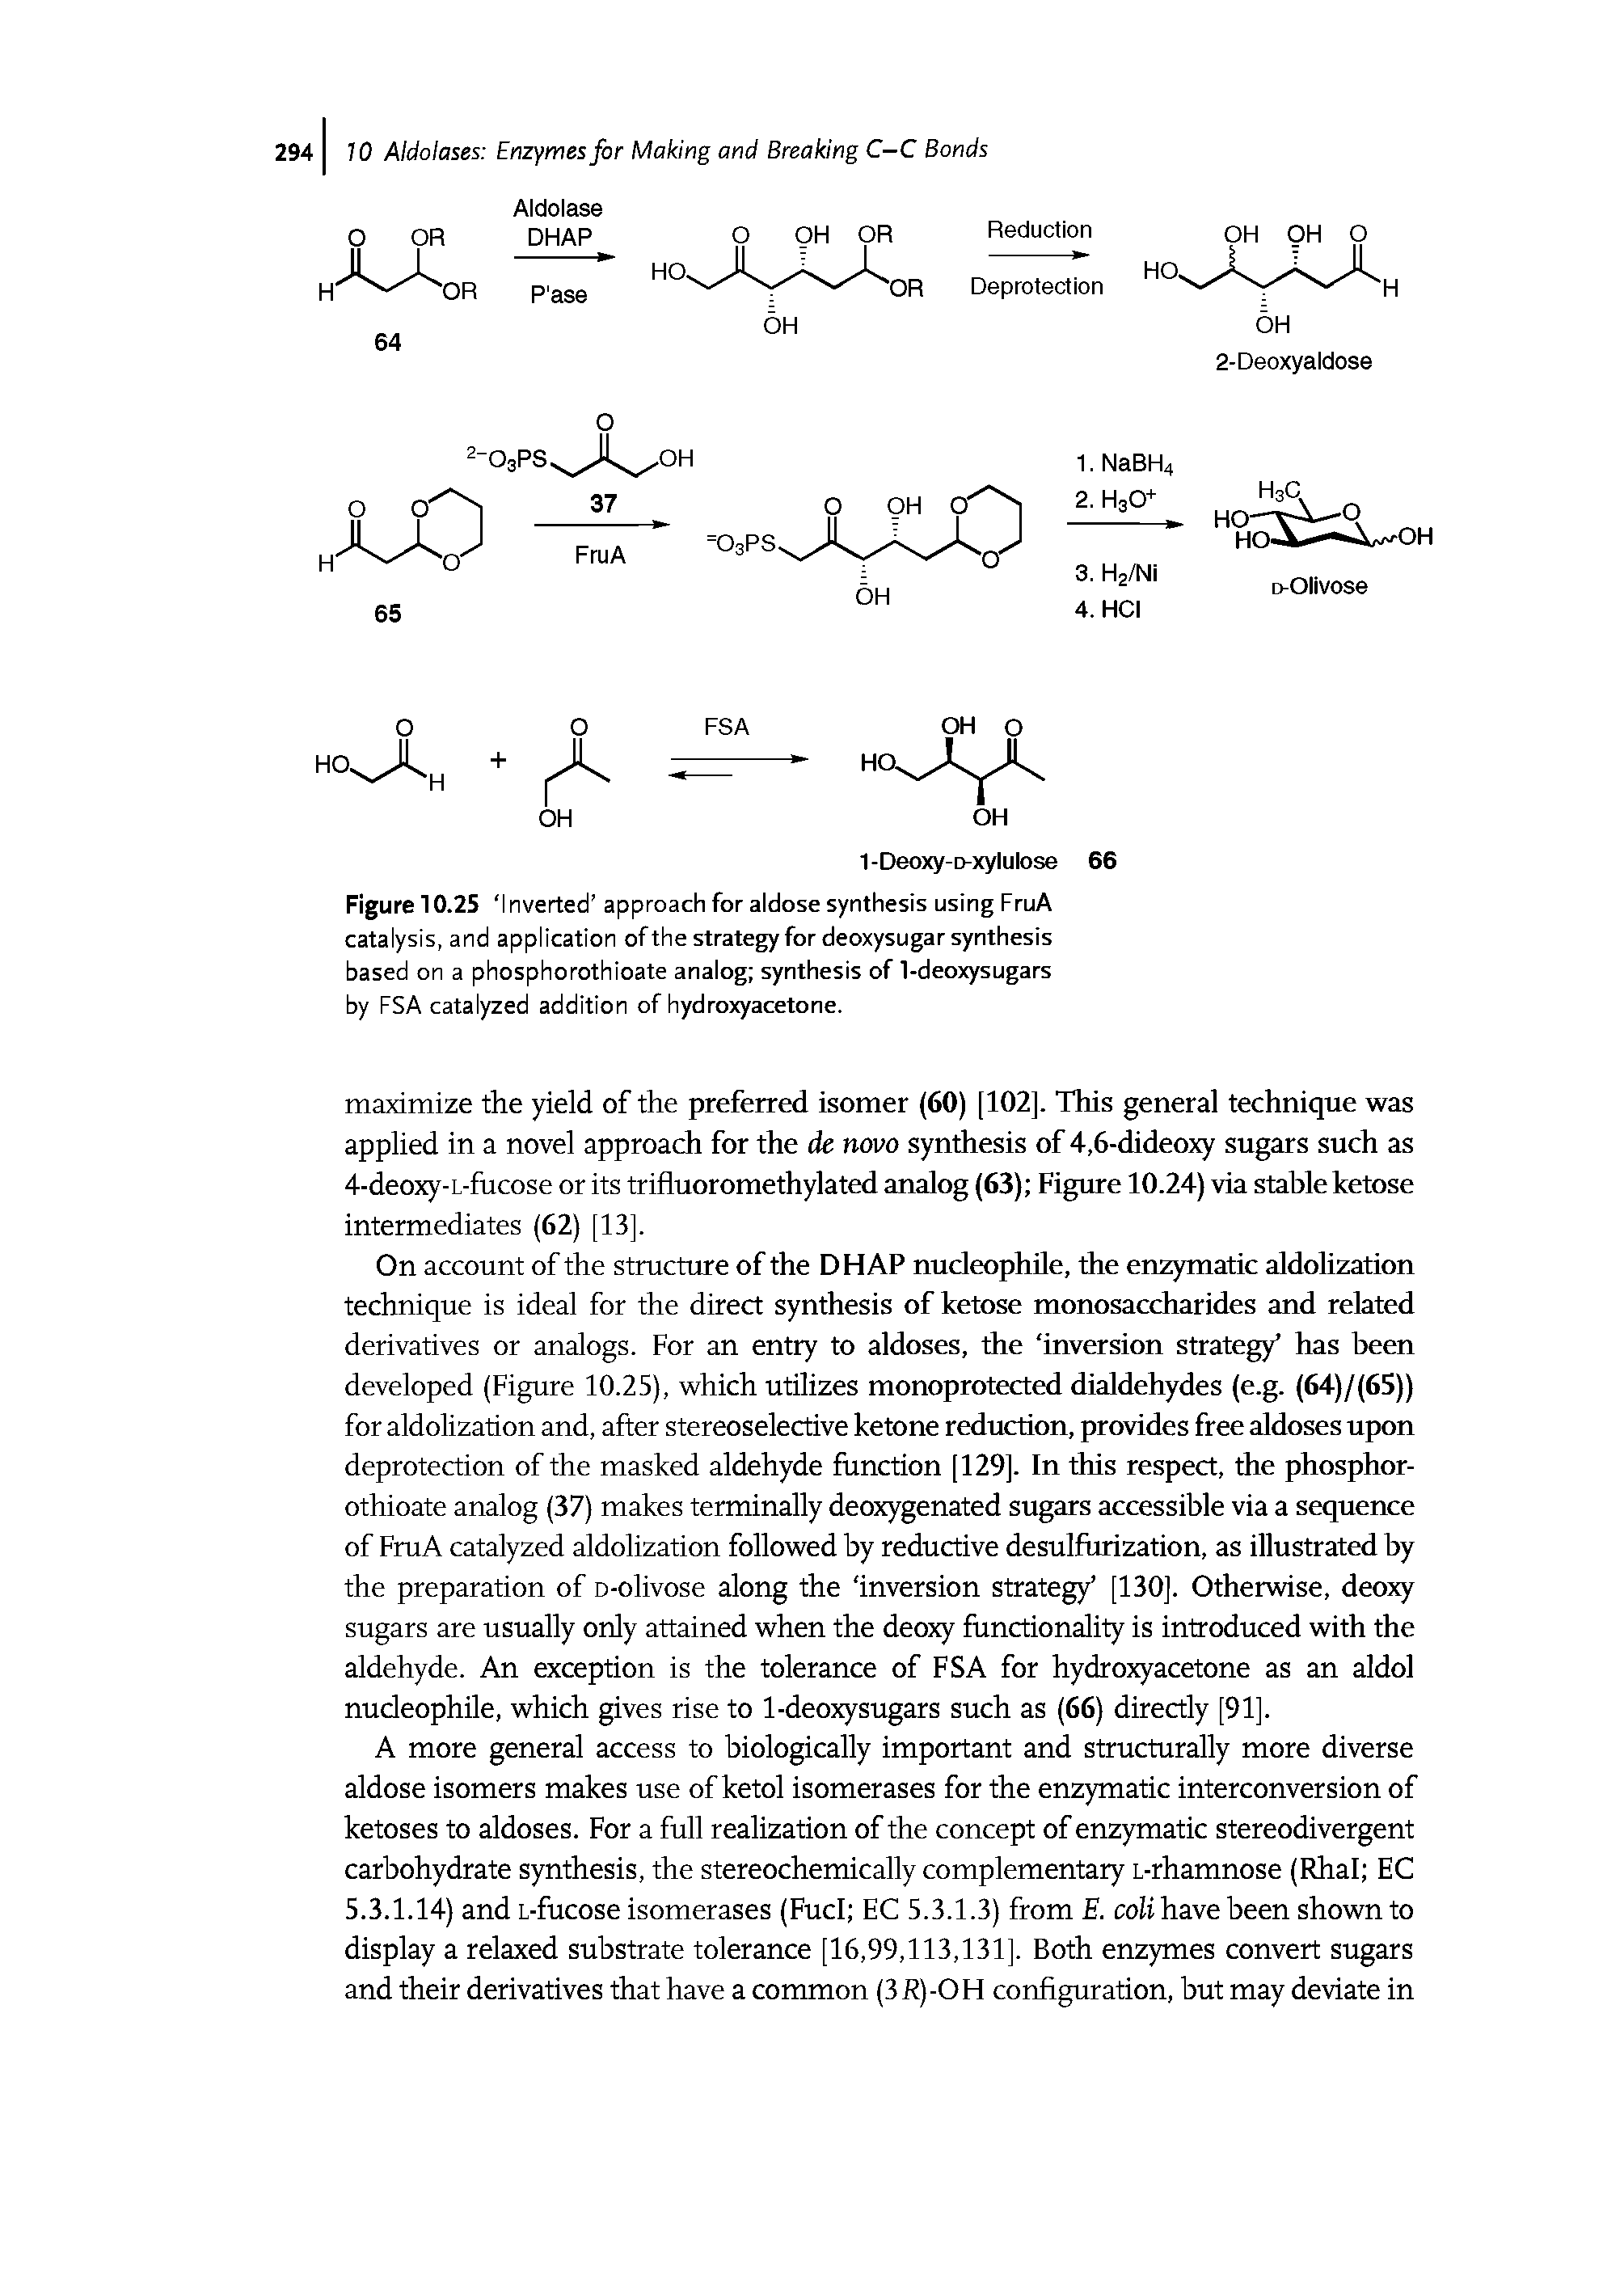 Figure 10.25 Inverted approach for aldose synthesis using FruA catalysis, and application ofthe strategy for deoxysugar synthesis based on a phosphorothioate analog synthesis of 1-deoxysugars by FSA catalyzed addition of hydroxyacetone.